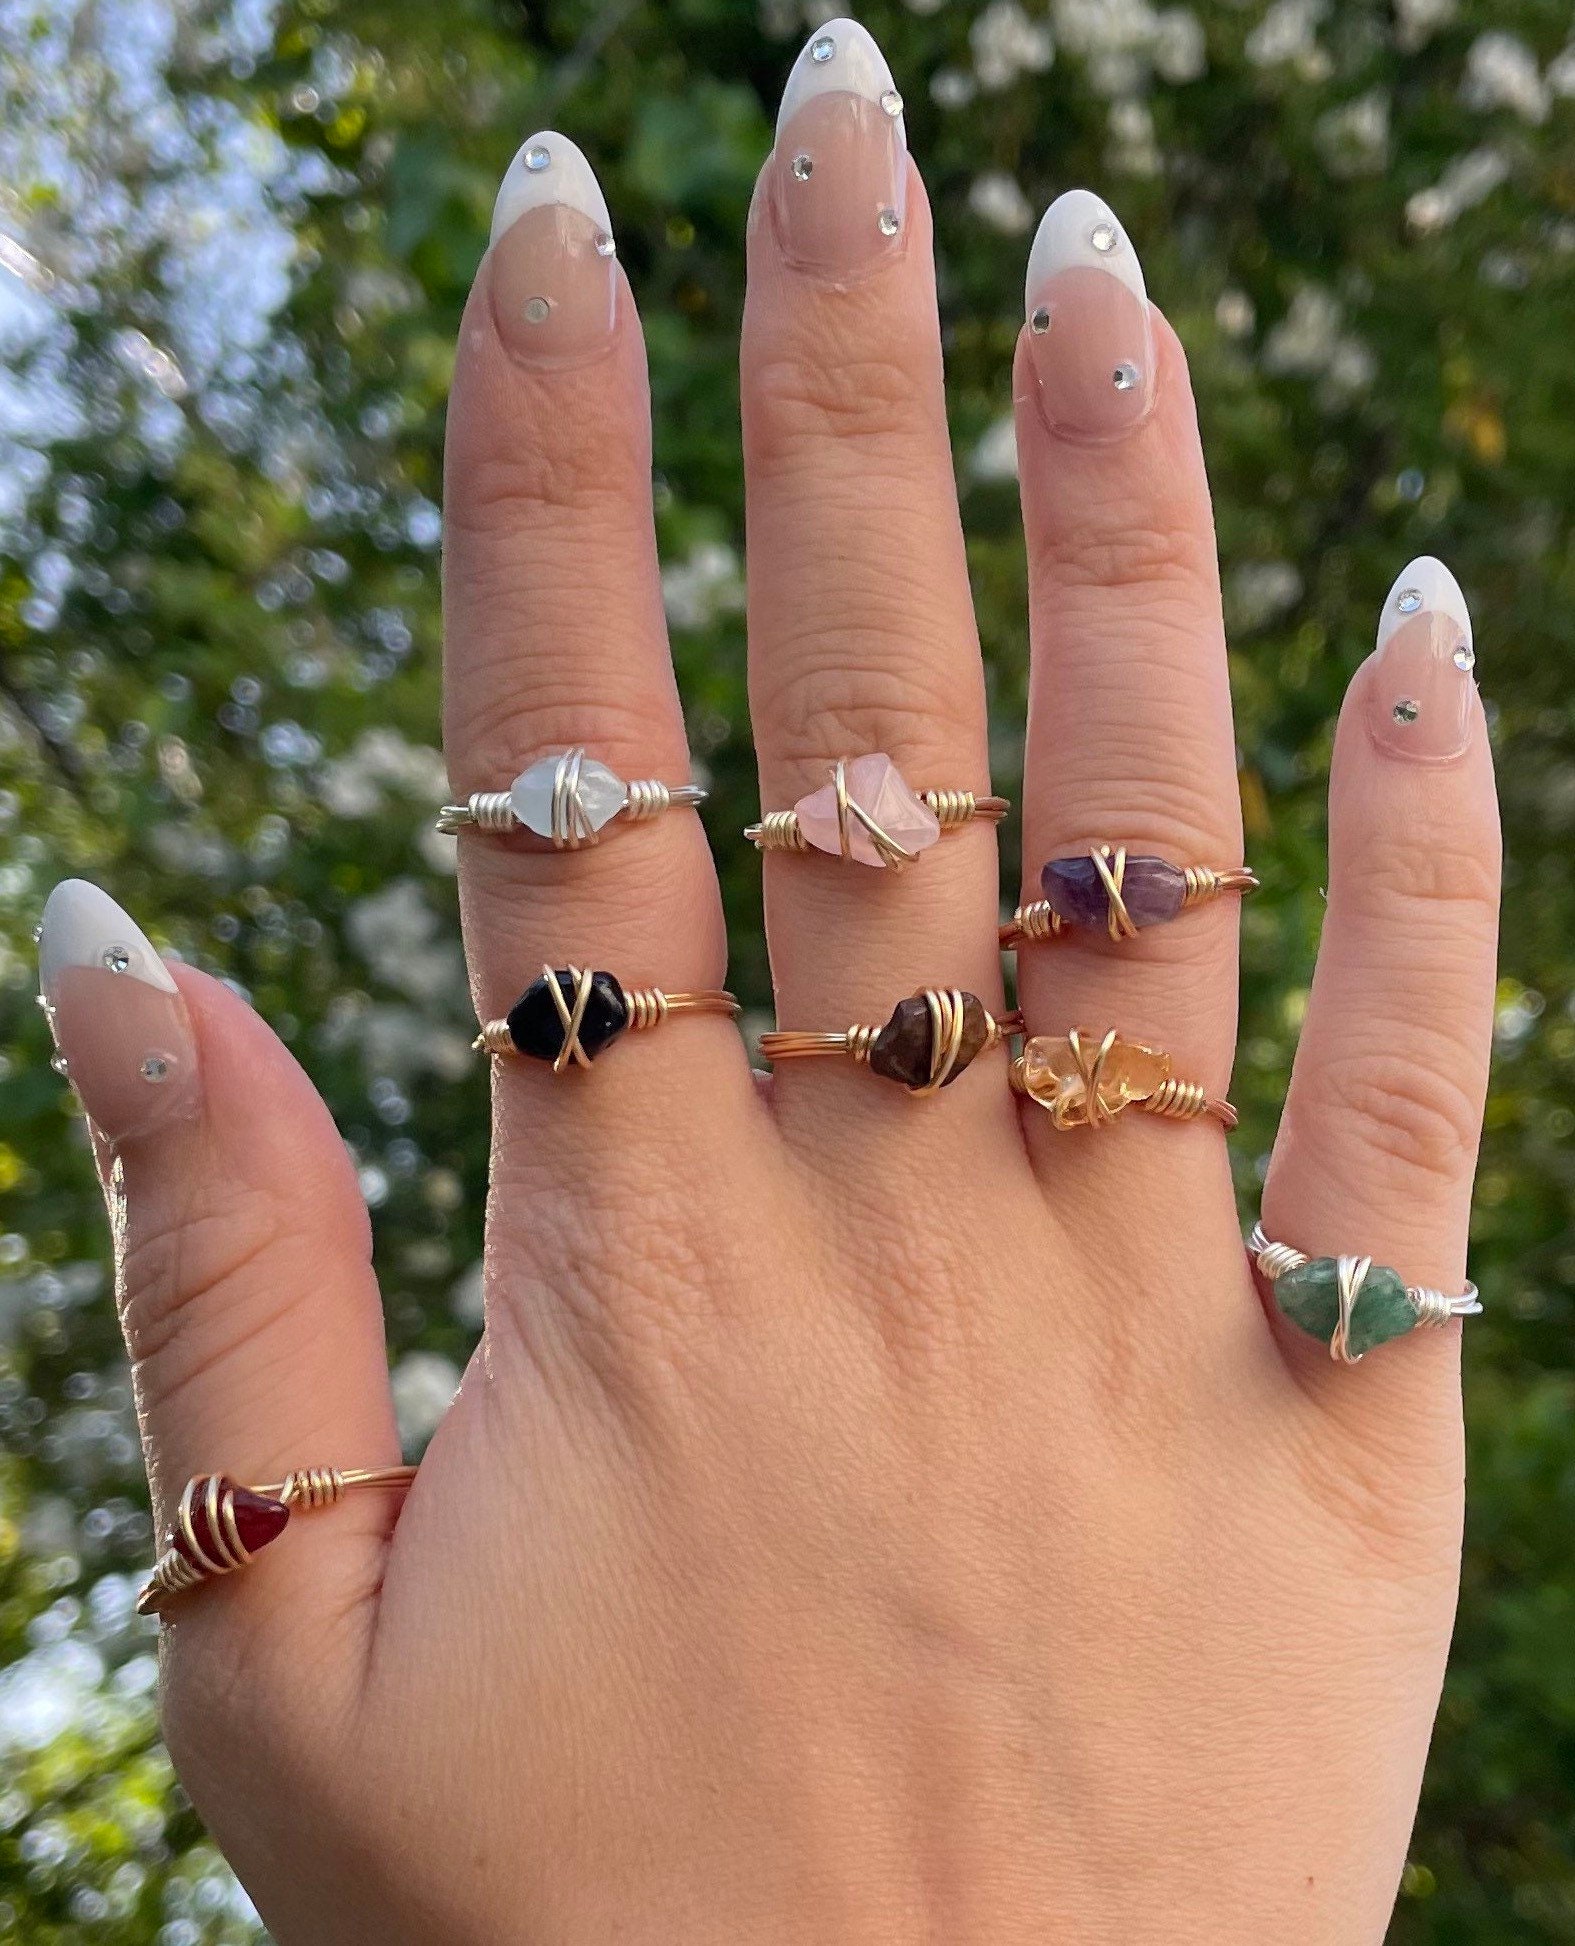 Secondhand engagement ring thoughts : r/EngagementRings